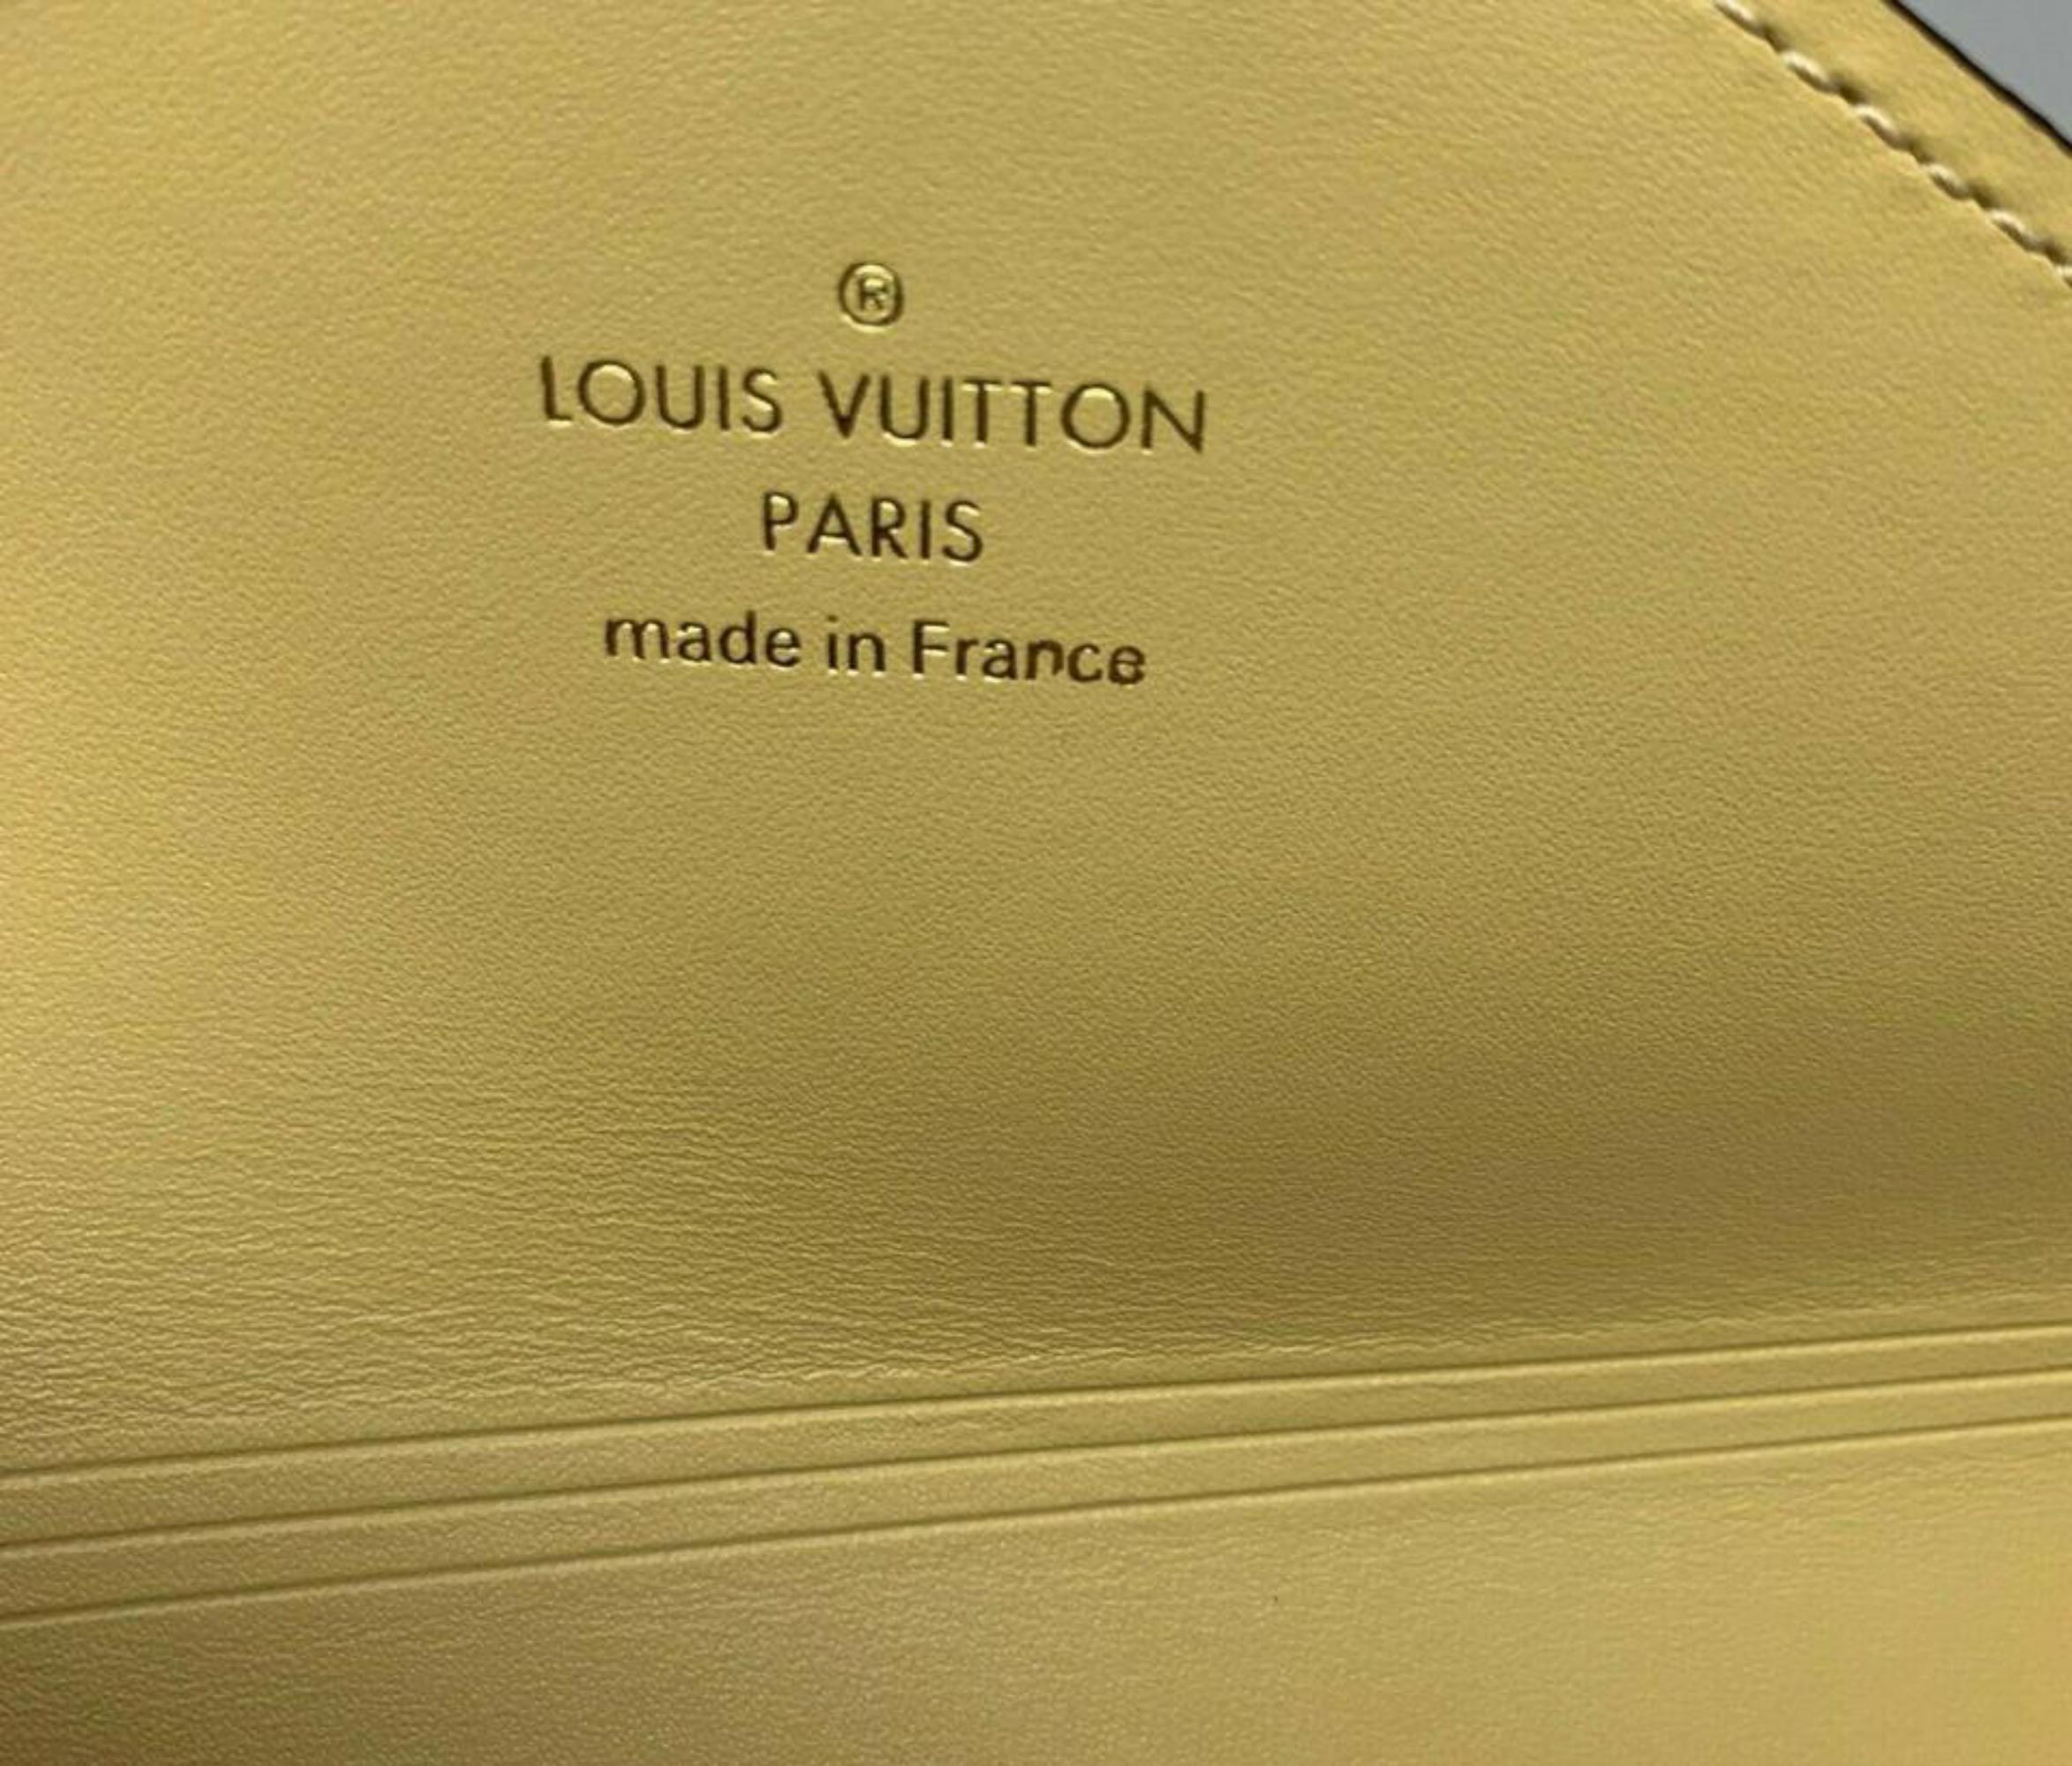 BRAND NEW
(N or 10/10)
Includes Dust Bag
Louis Vuitton invites you to discover the reinvention of the classic Monogram motif with the Summer Capsule Collection: Monogram Giant
Kirigami MM Pochette - Monogram Giant
Crafted of Monogram Giant canvas: